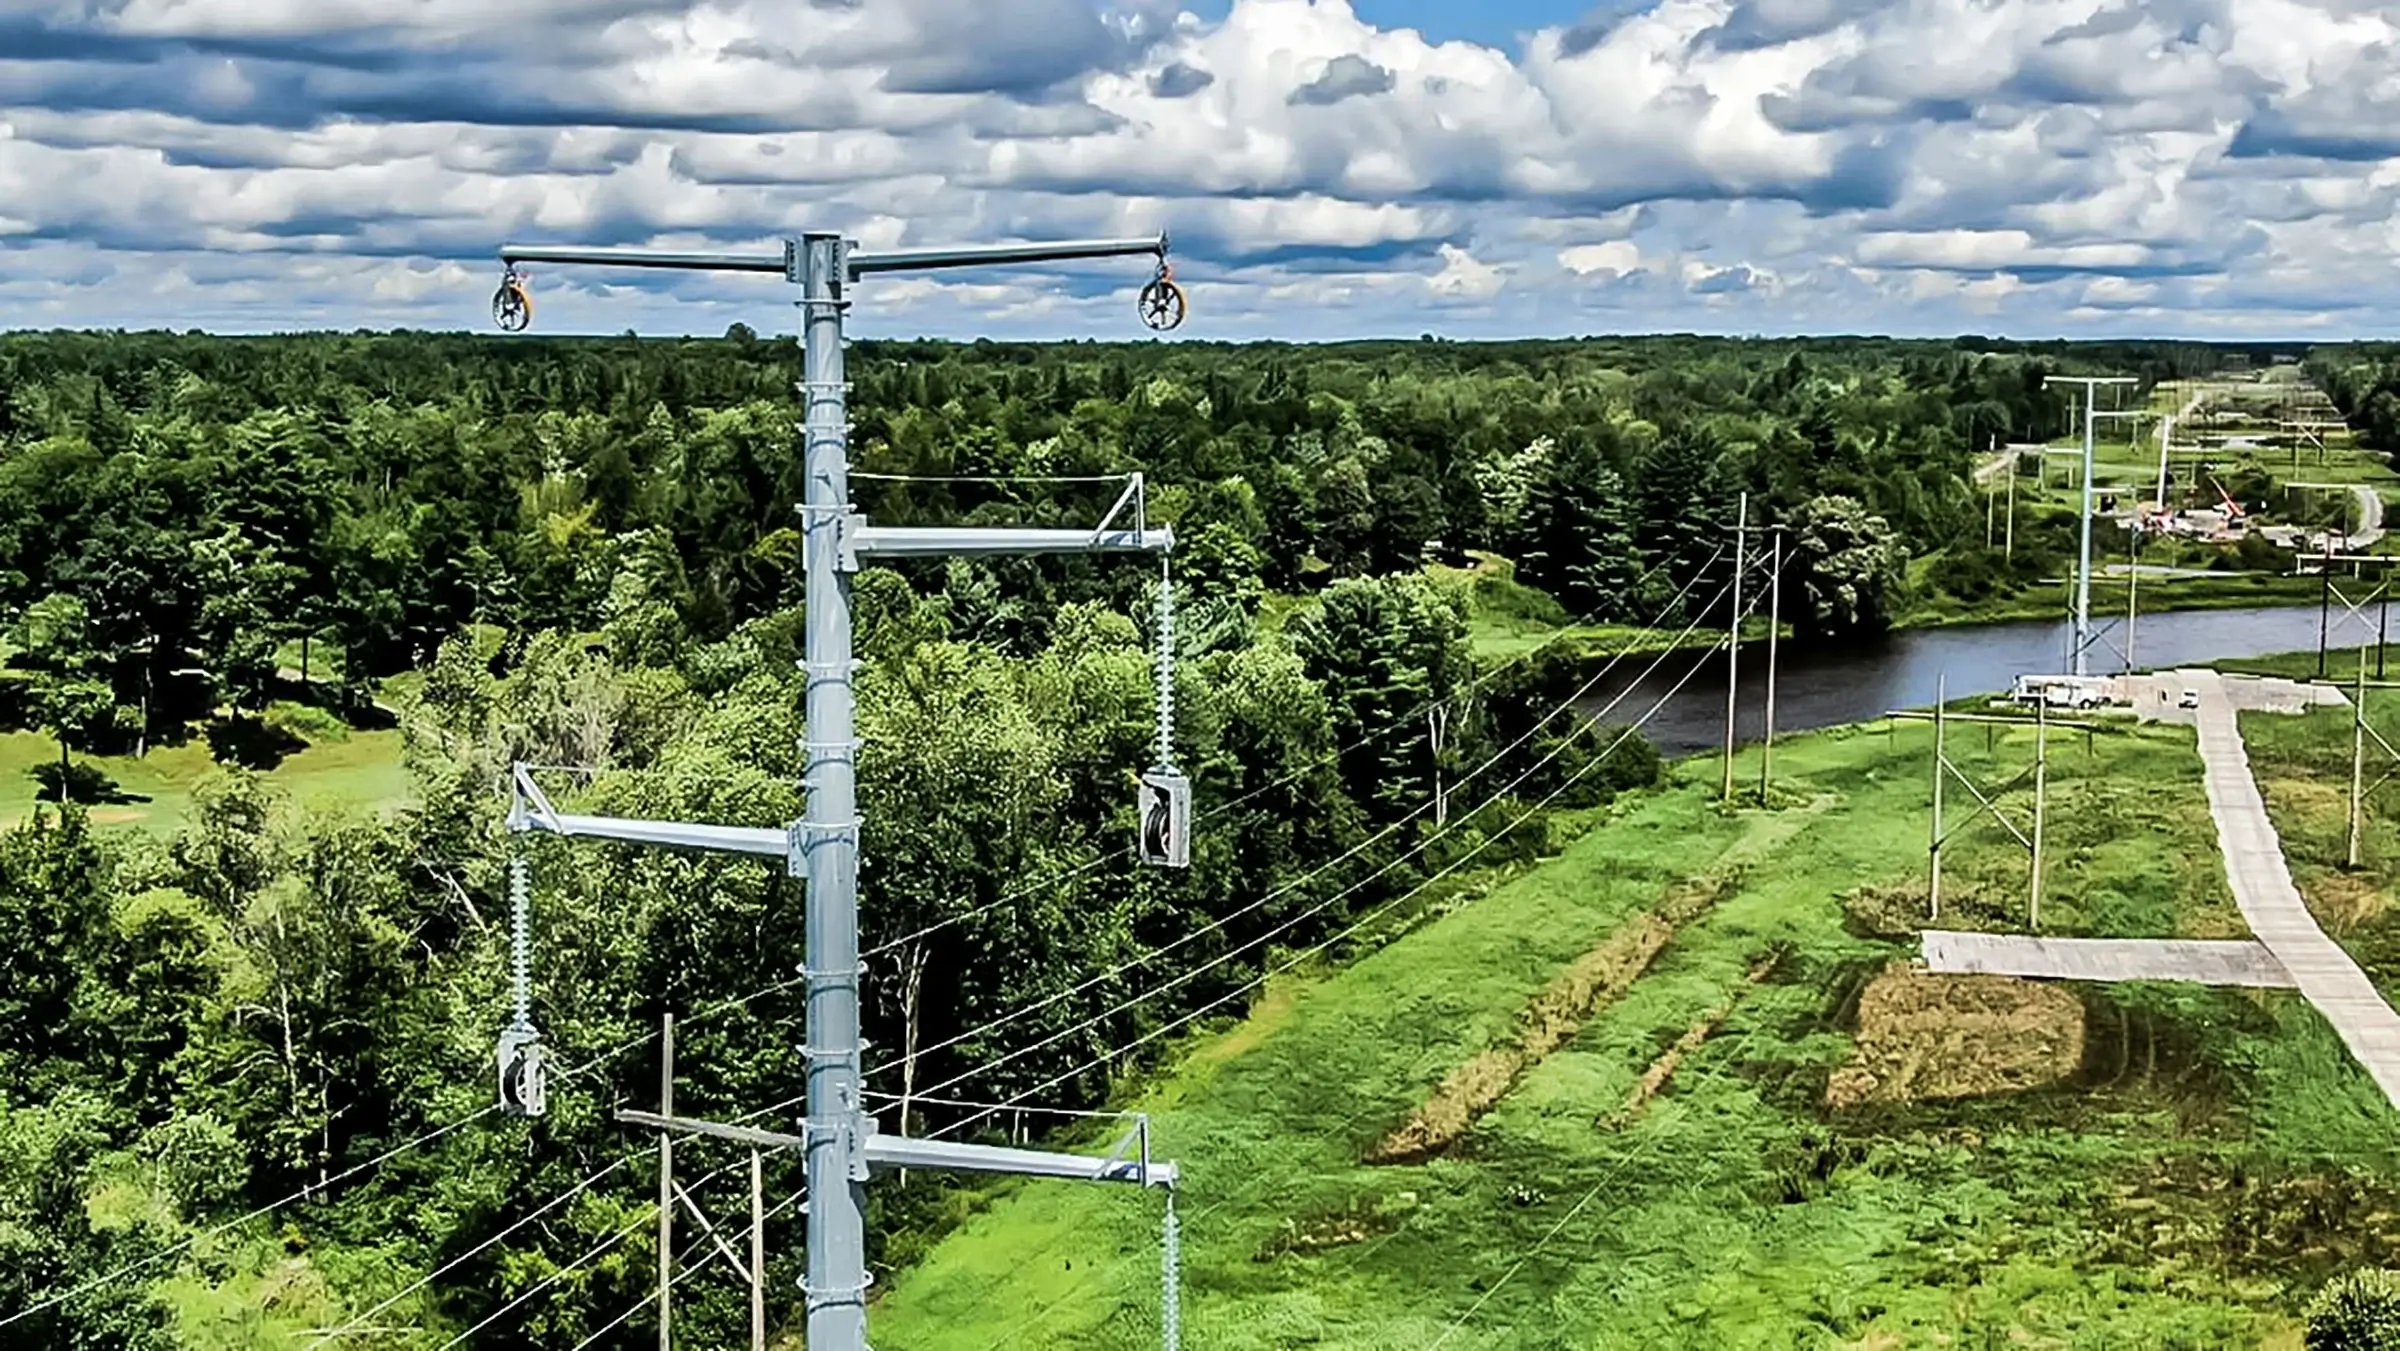 Power lines looking over greenery on the Moses Adirondack Smart Path project.